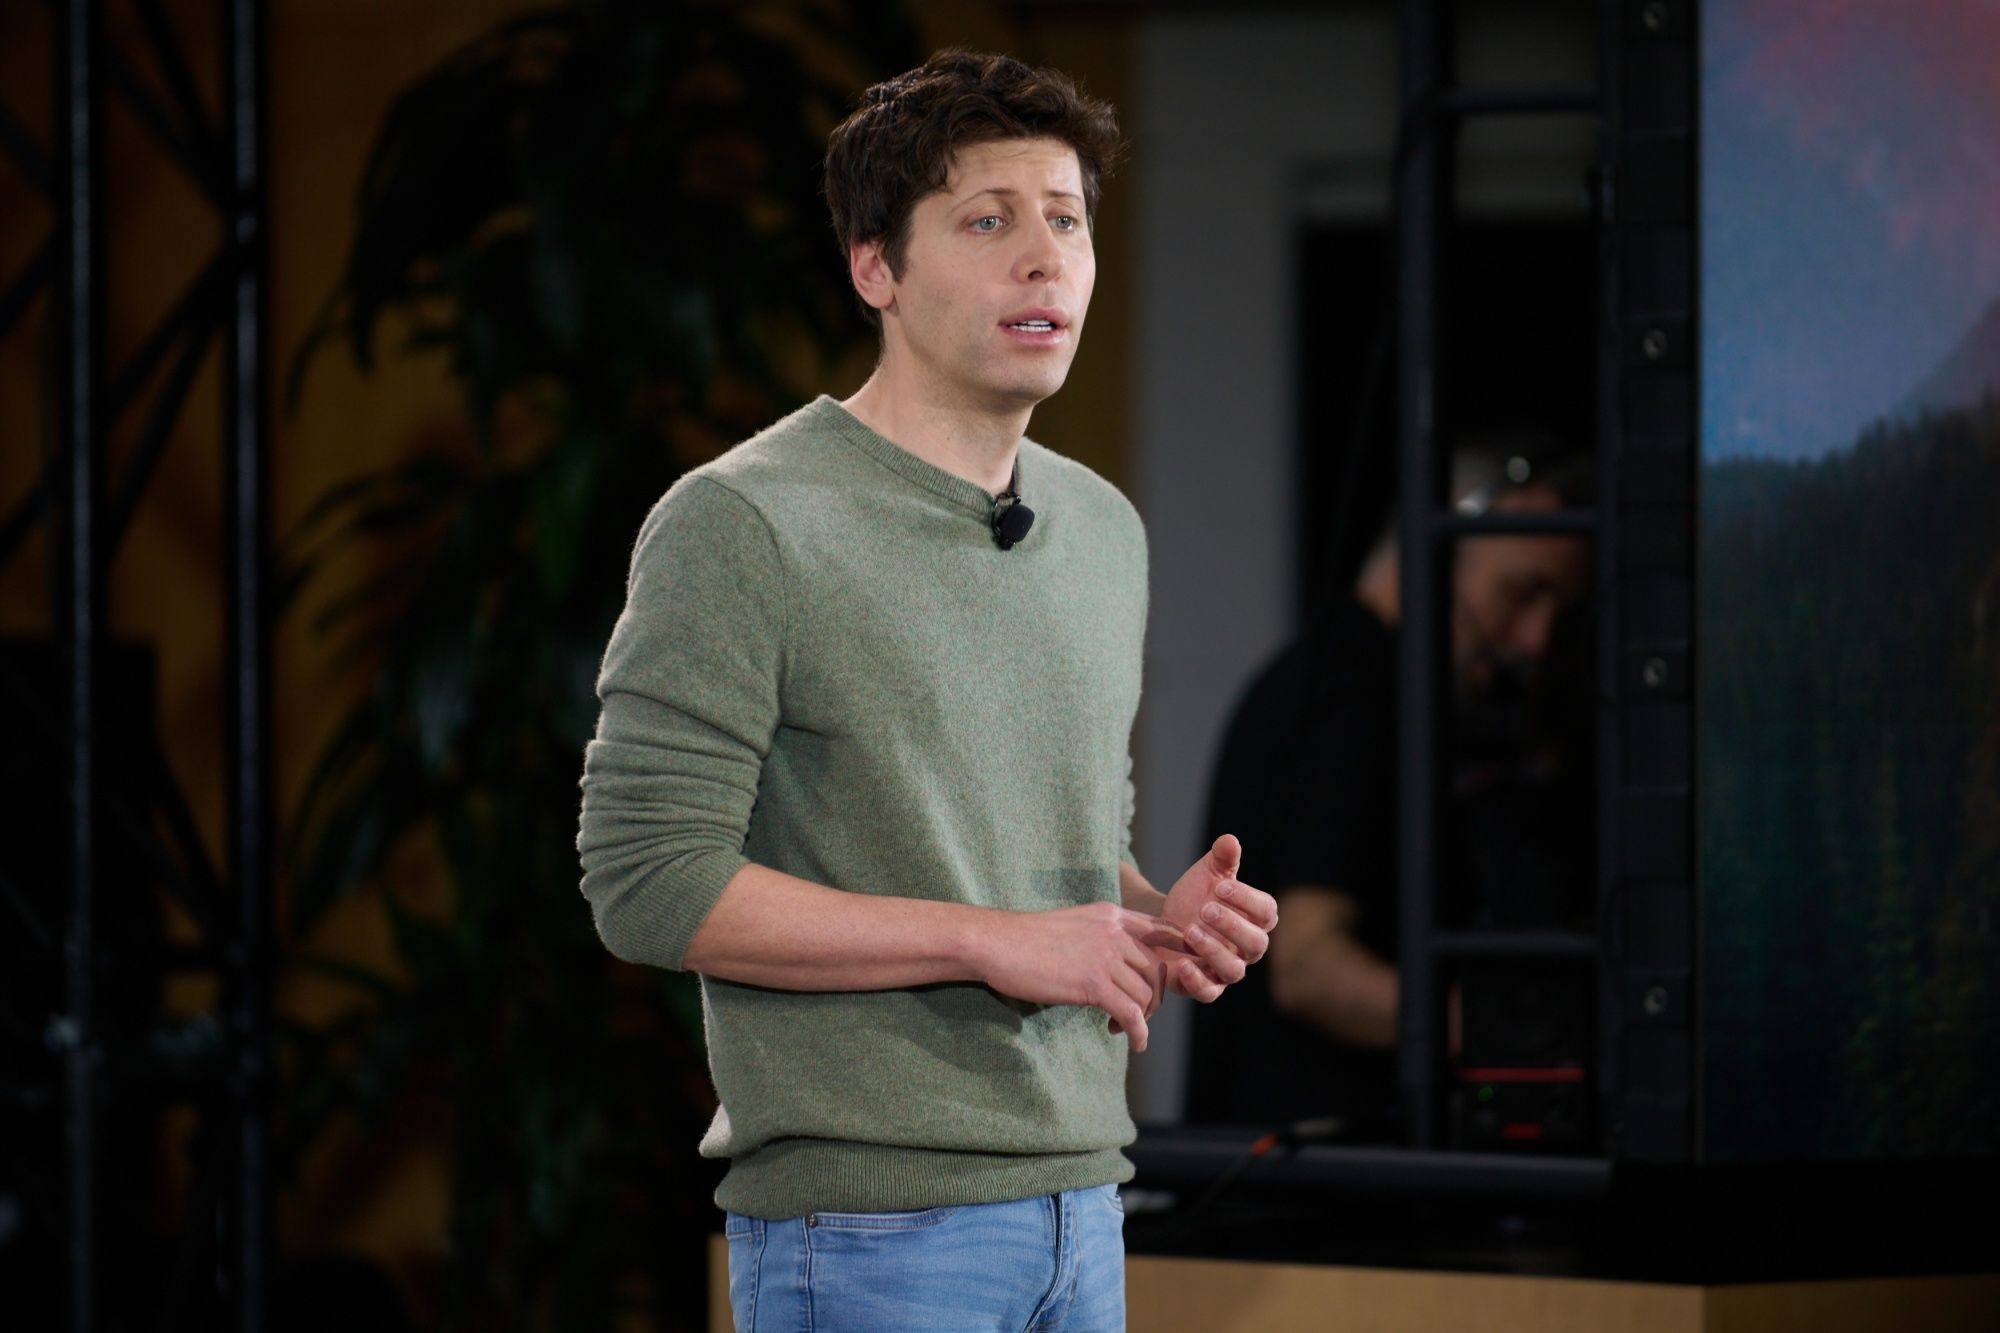 Sam Altman, CEO and co-founder of Open AI, speaks during an event at Microsoft, which is fusing ChatGPT-like technology into its Bing search engine. Photo: Bloomberg